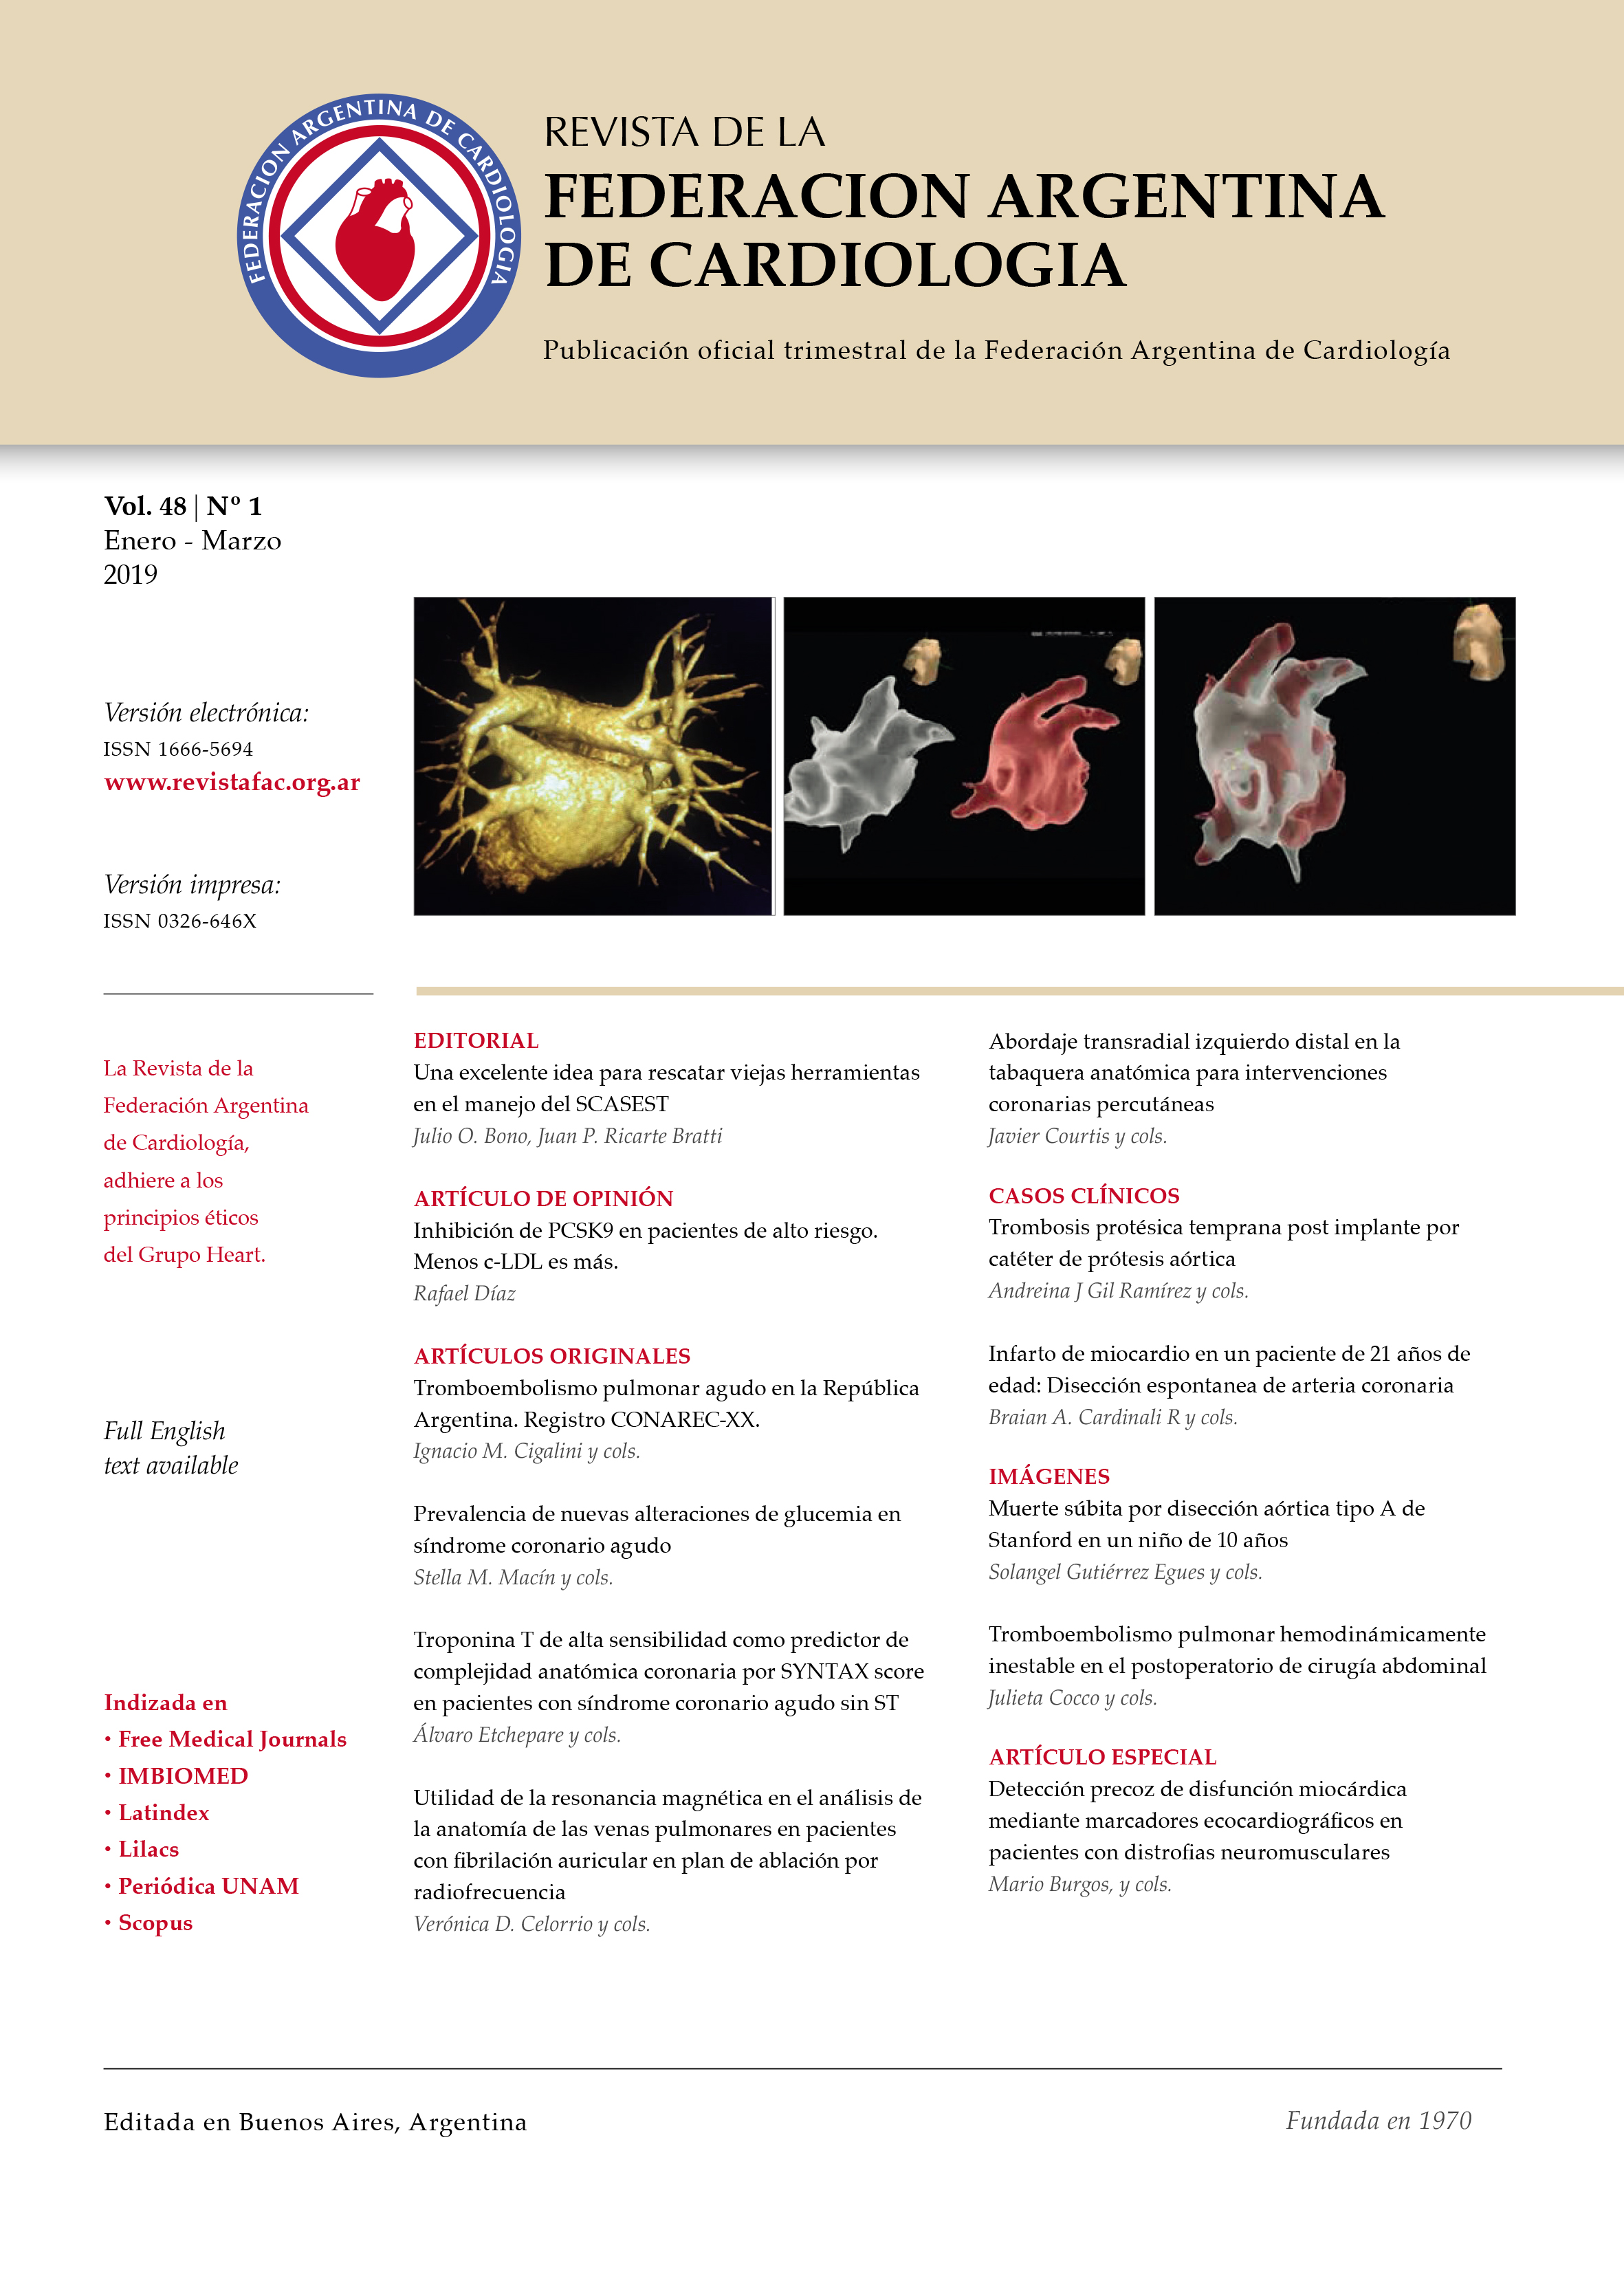 					View Vol. 48 No. 1 (2019): Journal of the Argentinian Federation of Cardiology
				